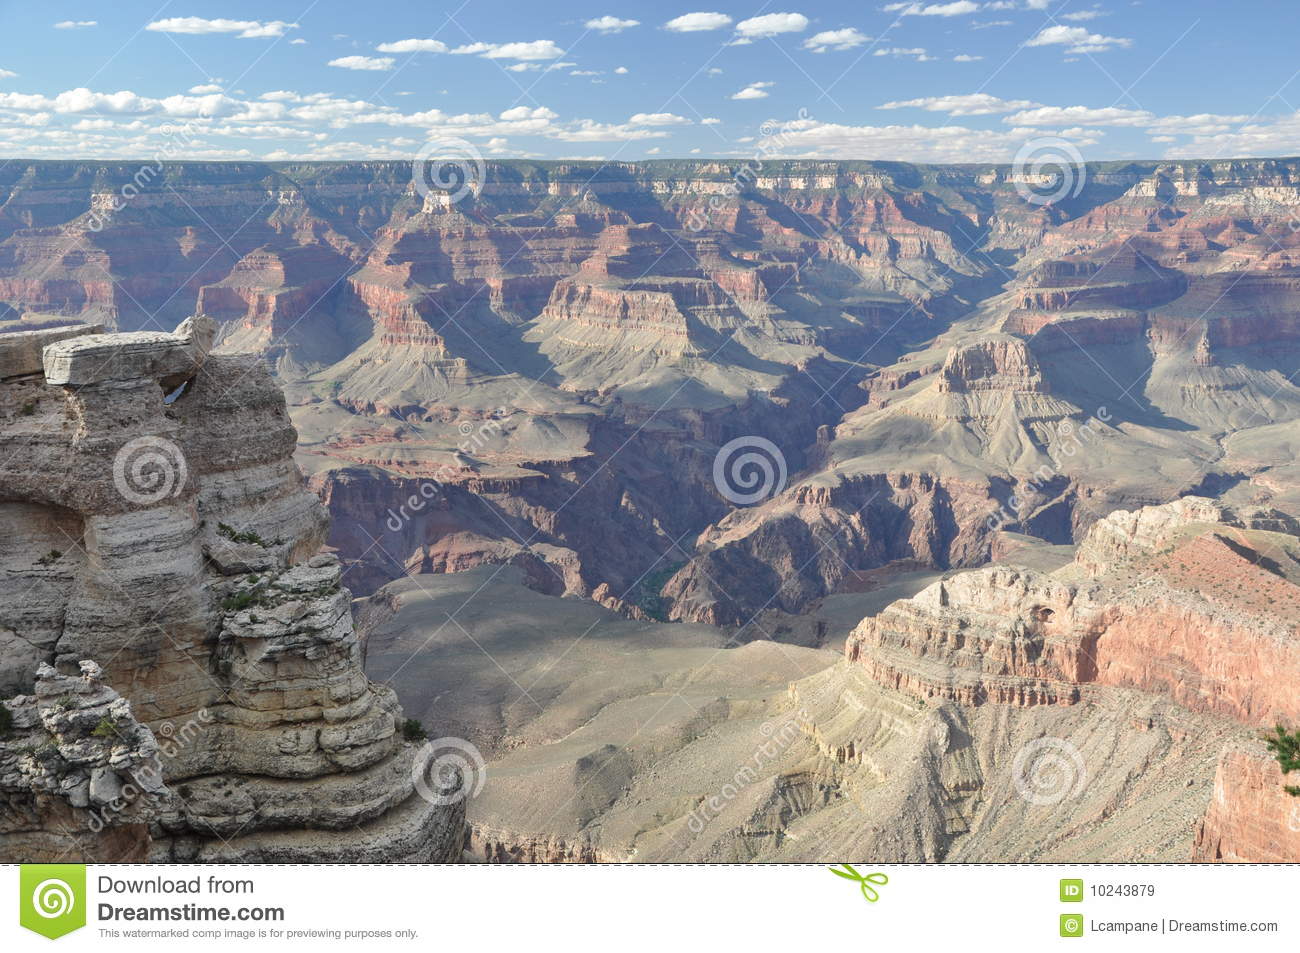 Grand Canyon Landscape Royalty Free Stock Images   Image  10243879